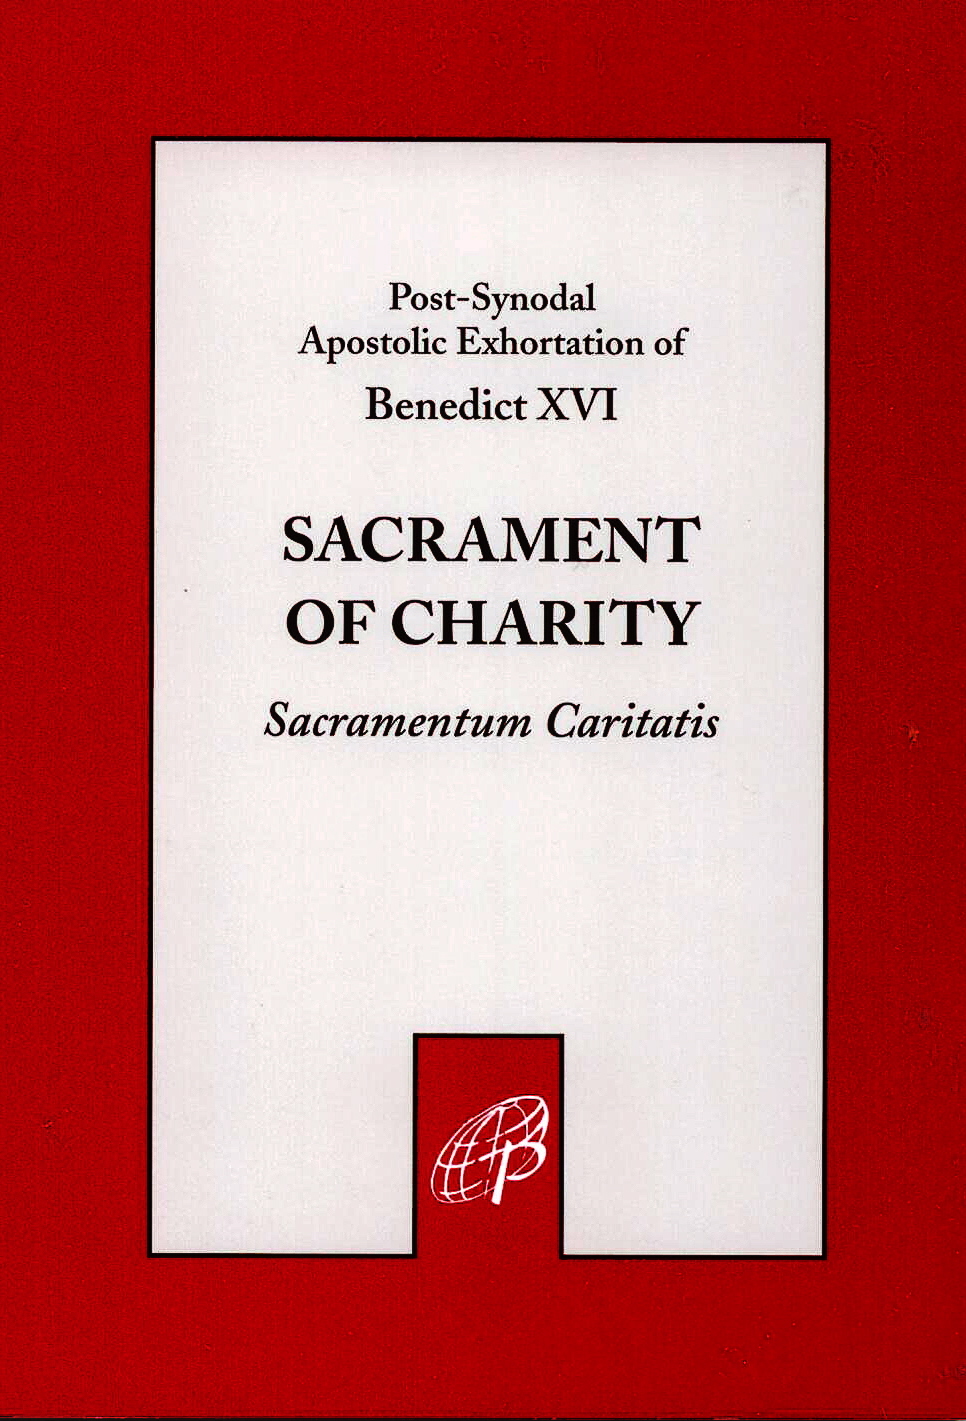 Sacrament Of Charity by Pope Benedict XVI